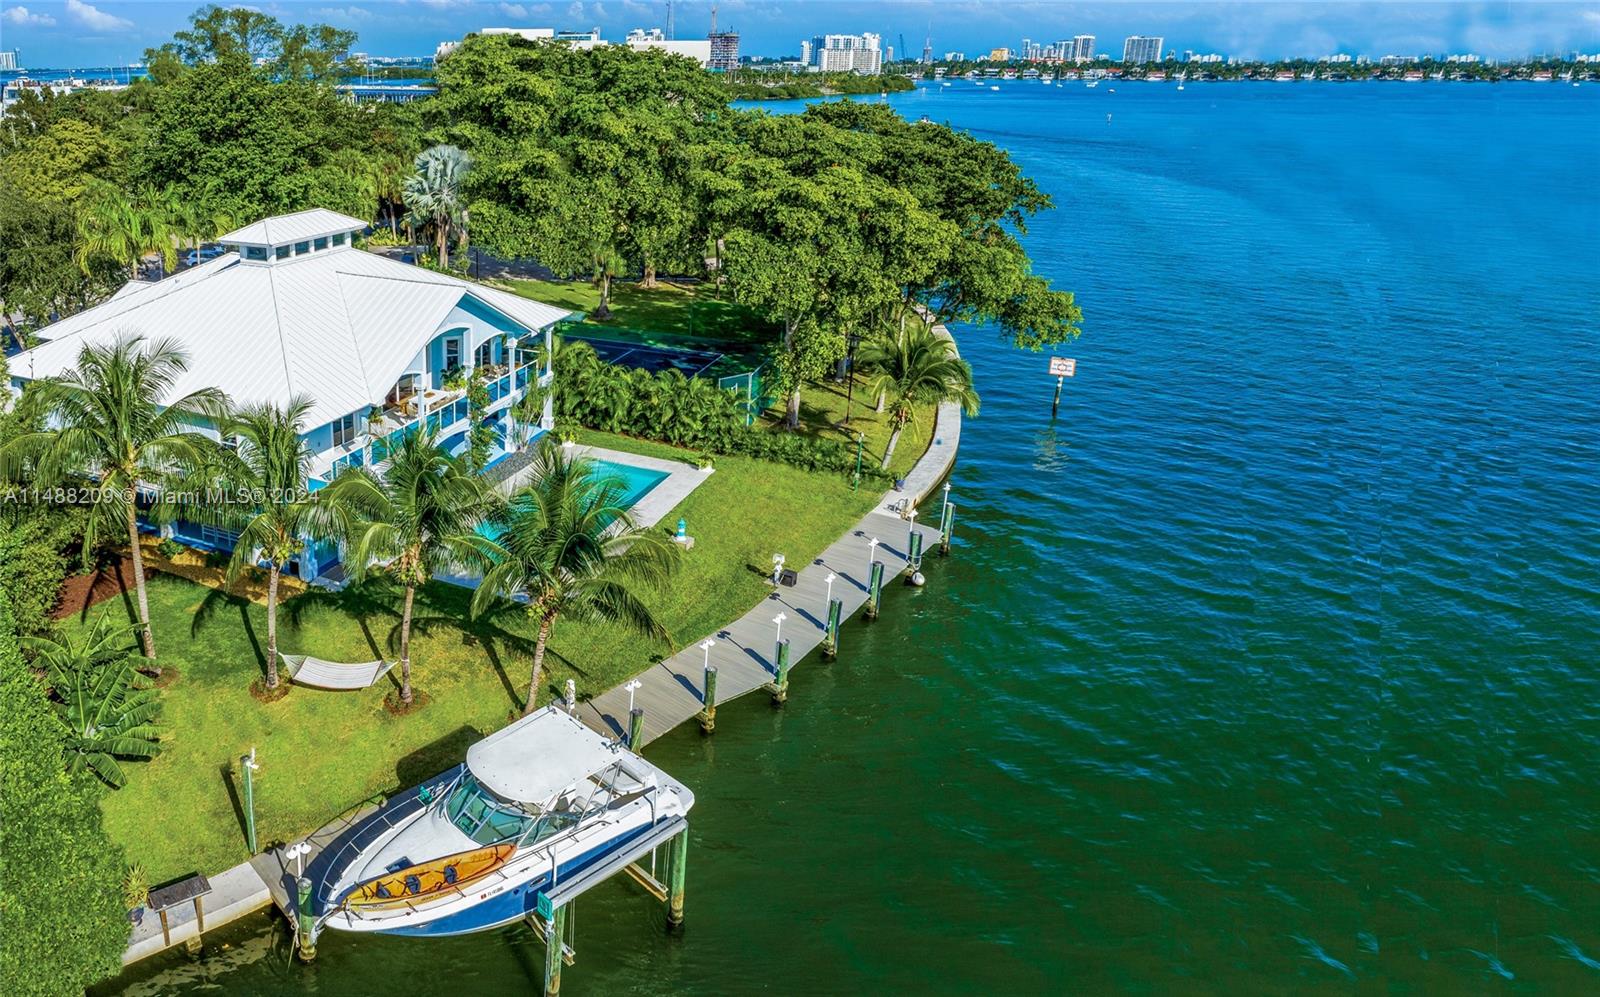 Welcome to this waterfront estate situated on a spacious 12,815 SF lot, with 120 feet of dock space along Biscayne Bay, perfect for a yacht of 80 feet. Enjoy relaxation and entertainment on the expansive wraparound covered patio and vibrant garden with a large pool. The completely renovated 6,572 SQ construction area boasts high ceilings and a 25-FT skylight, along with surrounding terraces. Additional features include a service room with full bathroom, playroom, and elevator. Ideally located near private schools, top restaurants, and shopping centers, this property offers a unique opportunity for future expansion. The property is available for lease fully furnished for a minimum of three months, starting from August 1st. Owner Financing Available.